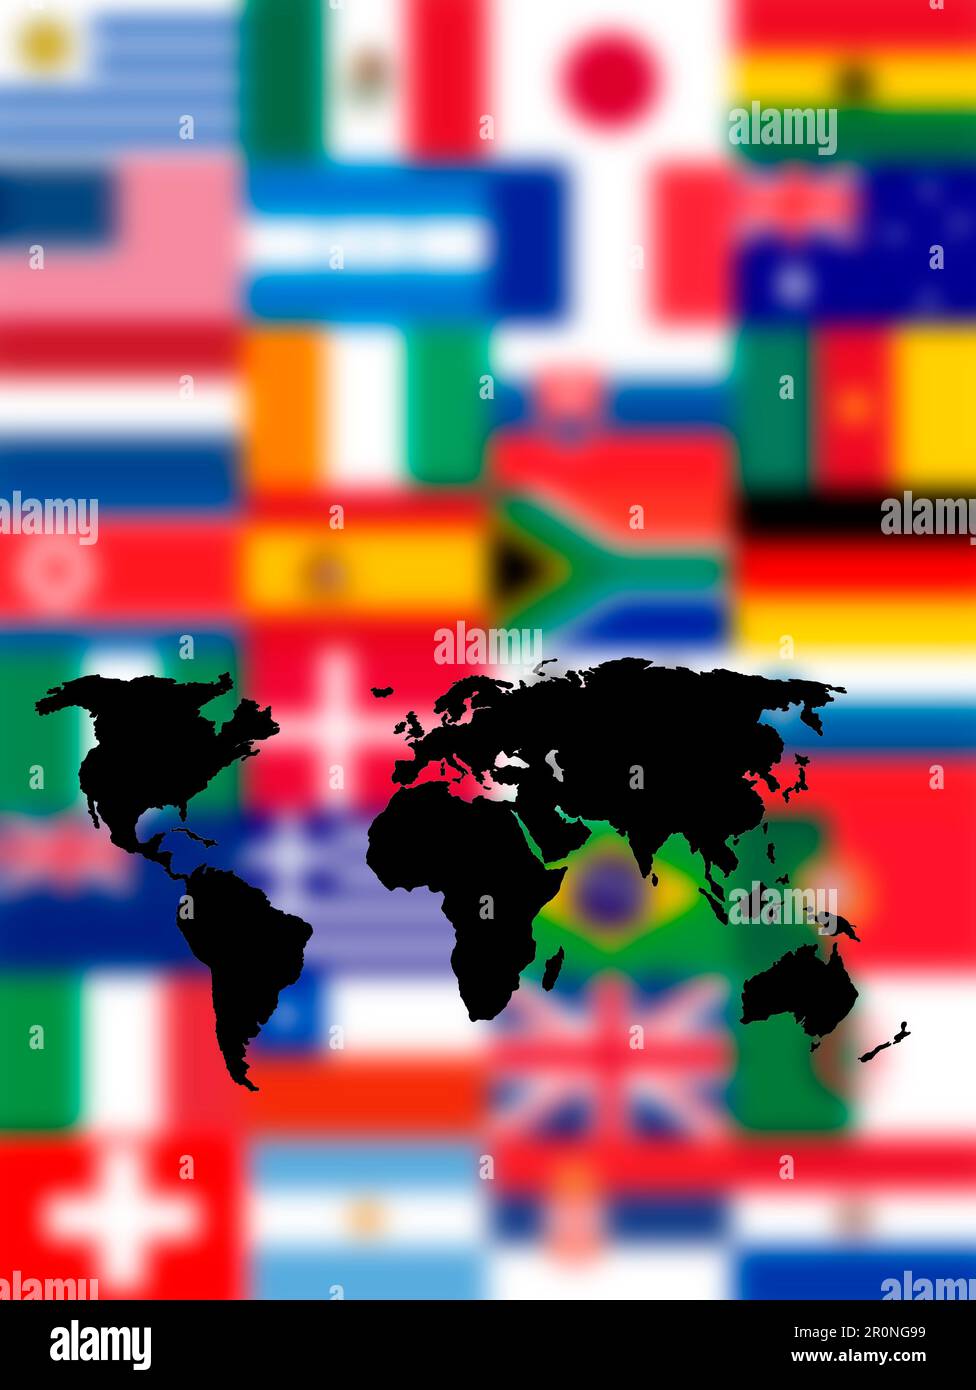 world map and background of flags of the nations Stock Photo